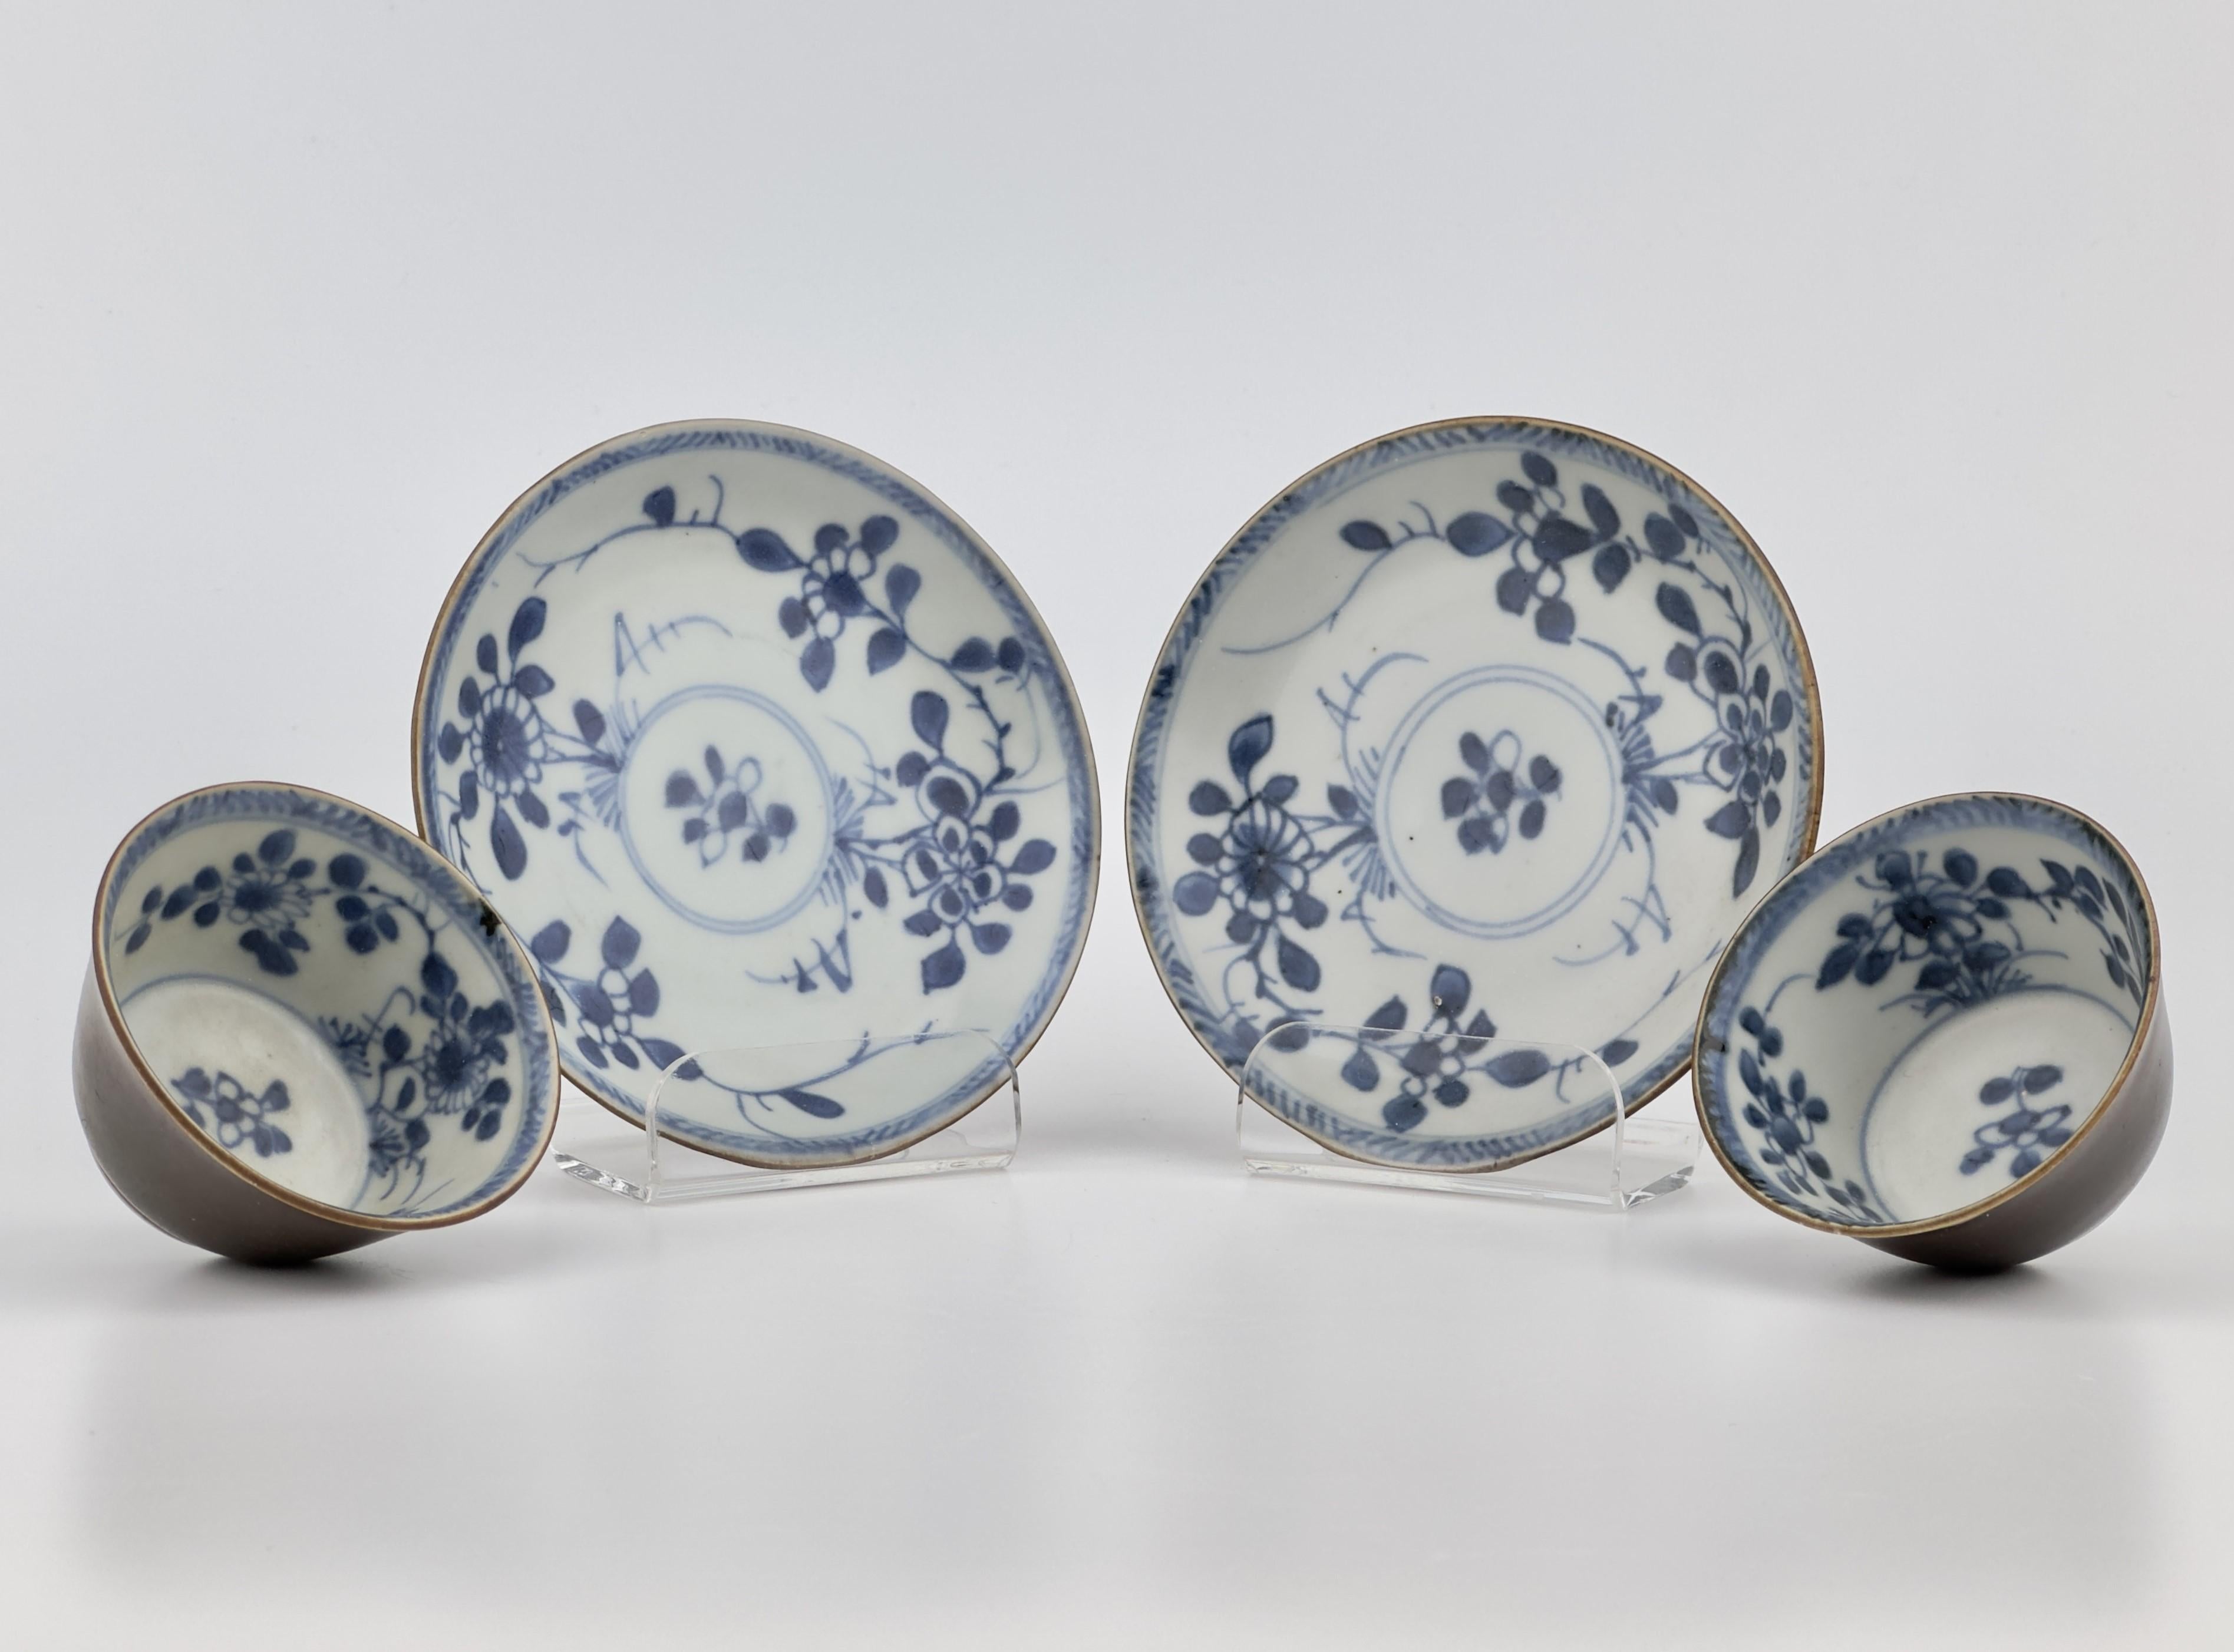 They display central floral motifs surrounded by a variety of botanical patterns including branches and blooms, indicative of classic East Asian ceramic artistry.

Period : Qing Dynasty, Yongzheng Period
Production Date : C 1725
Made in :